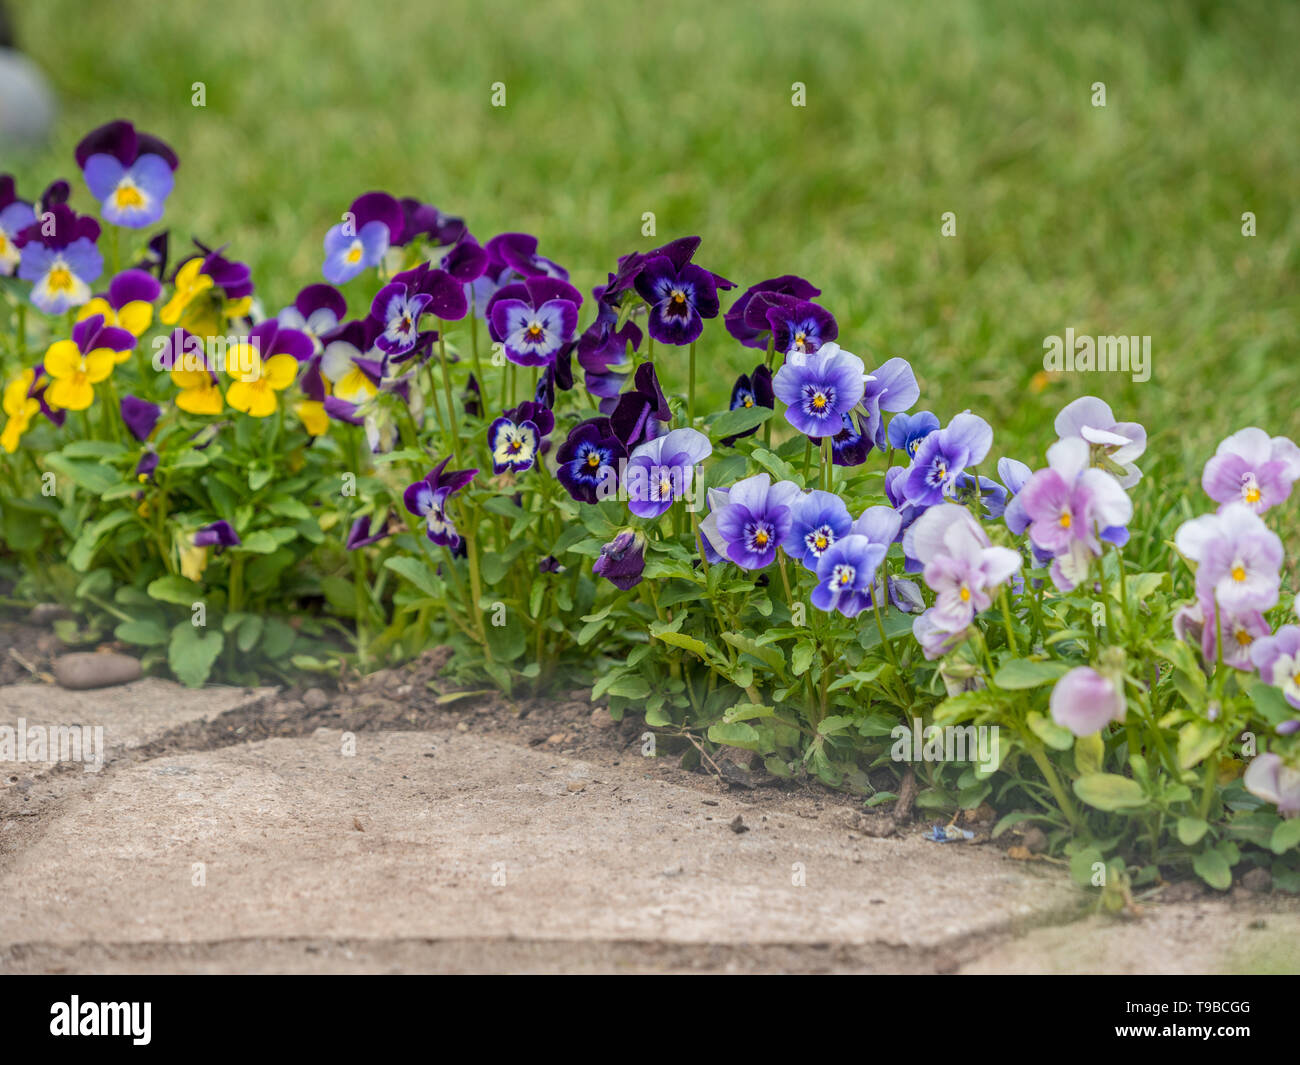 pansies / Violas flowering in border between lawn and paved garden path. Stock Photo